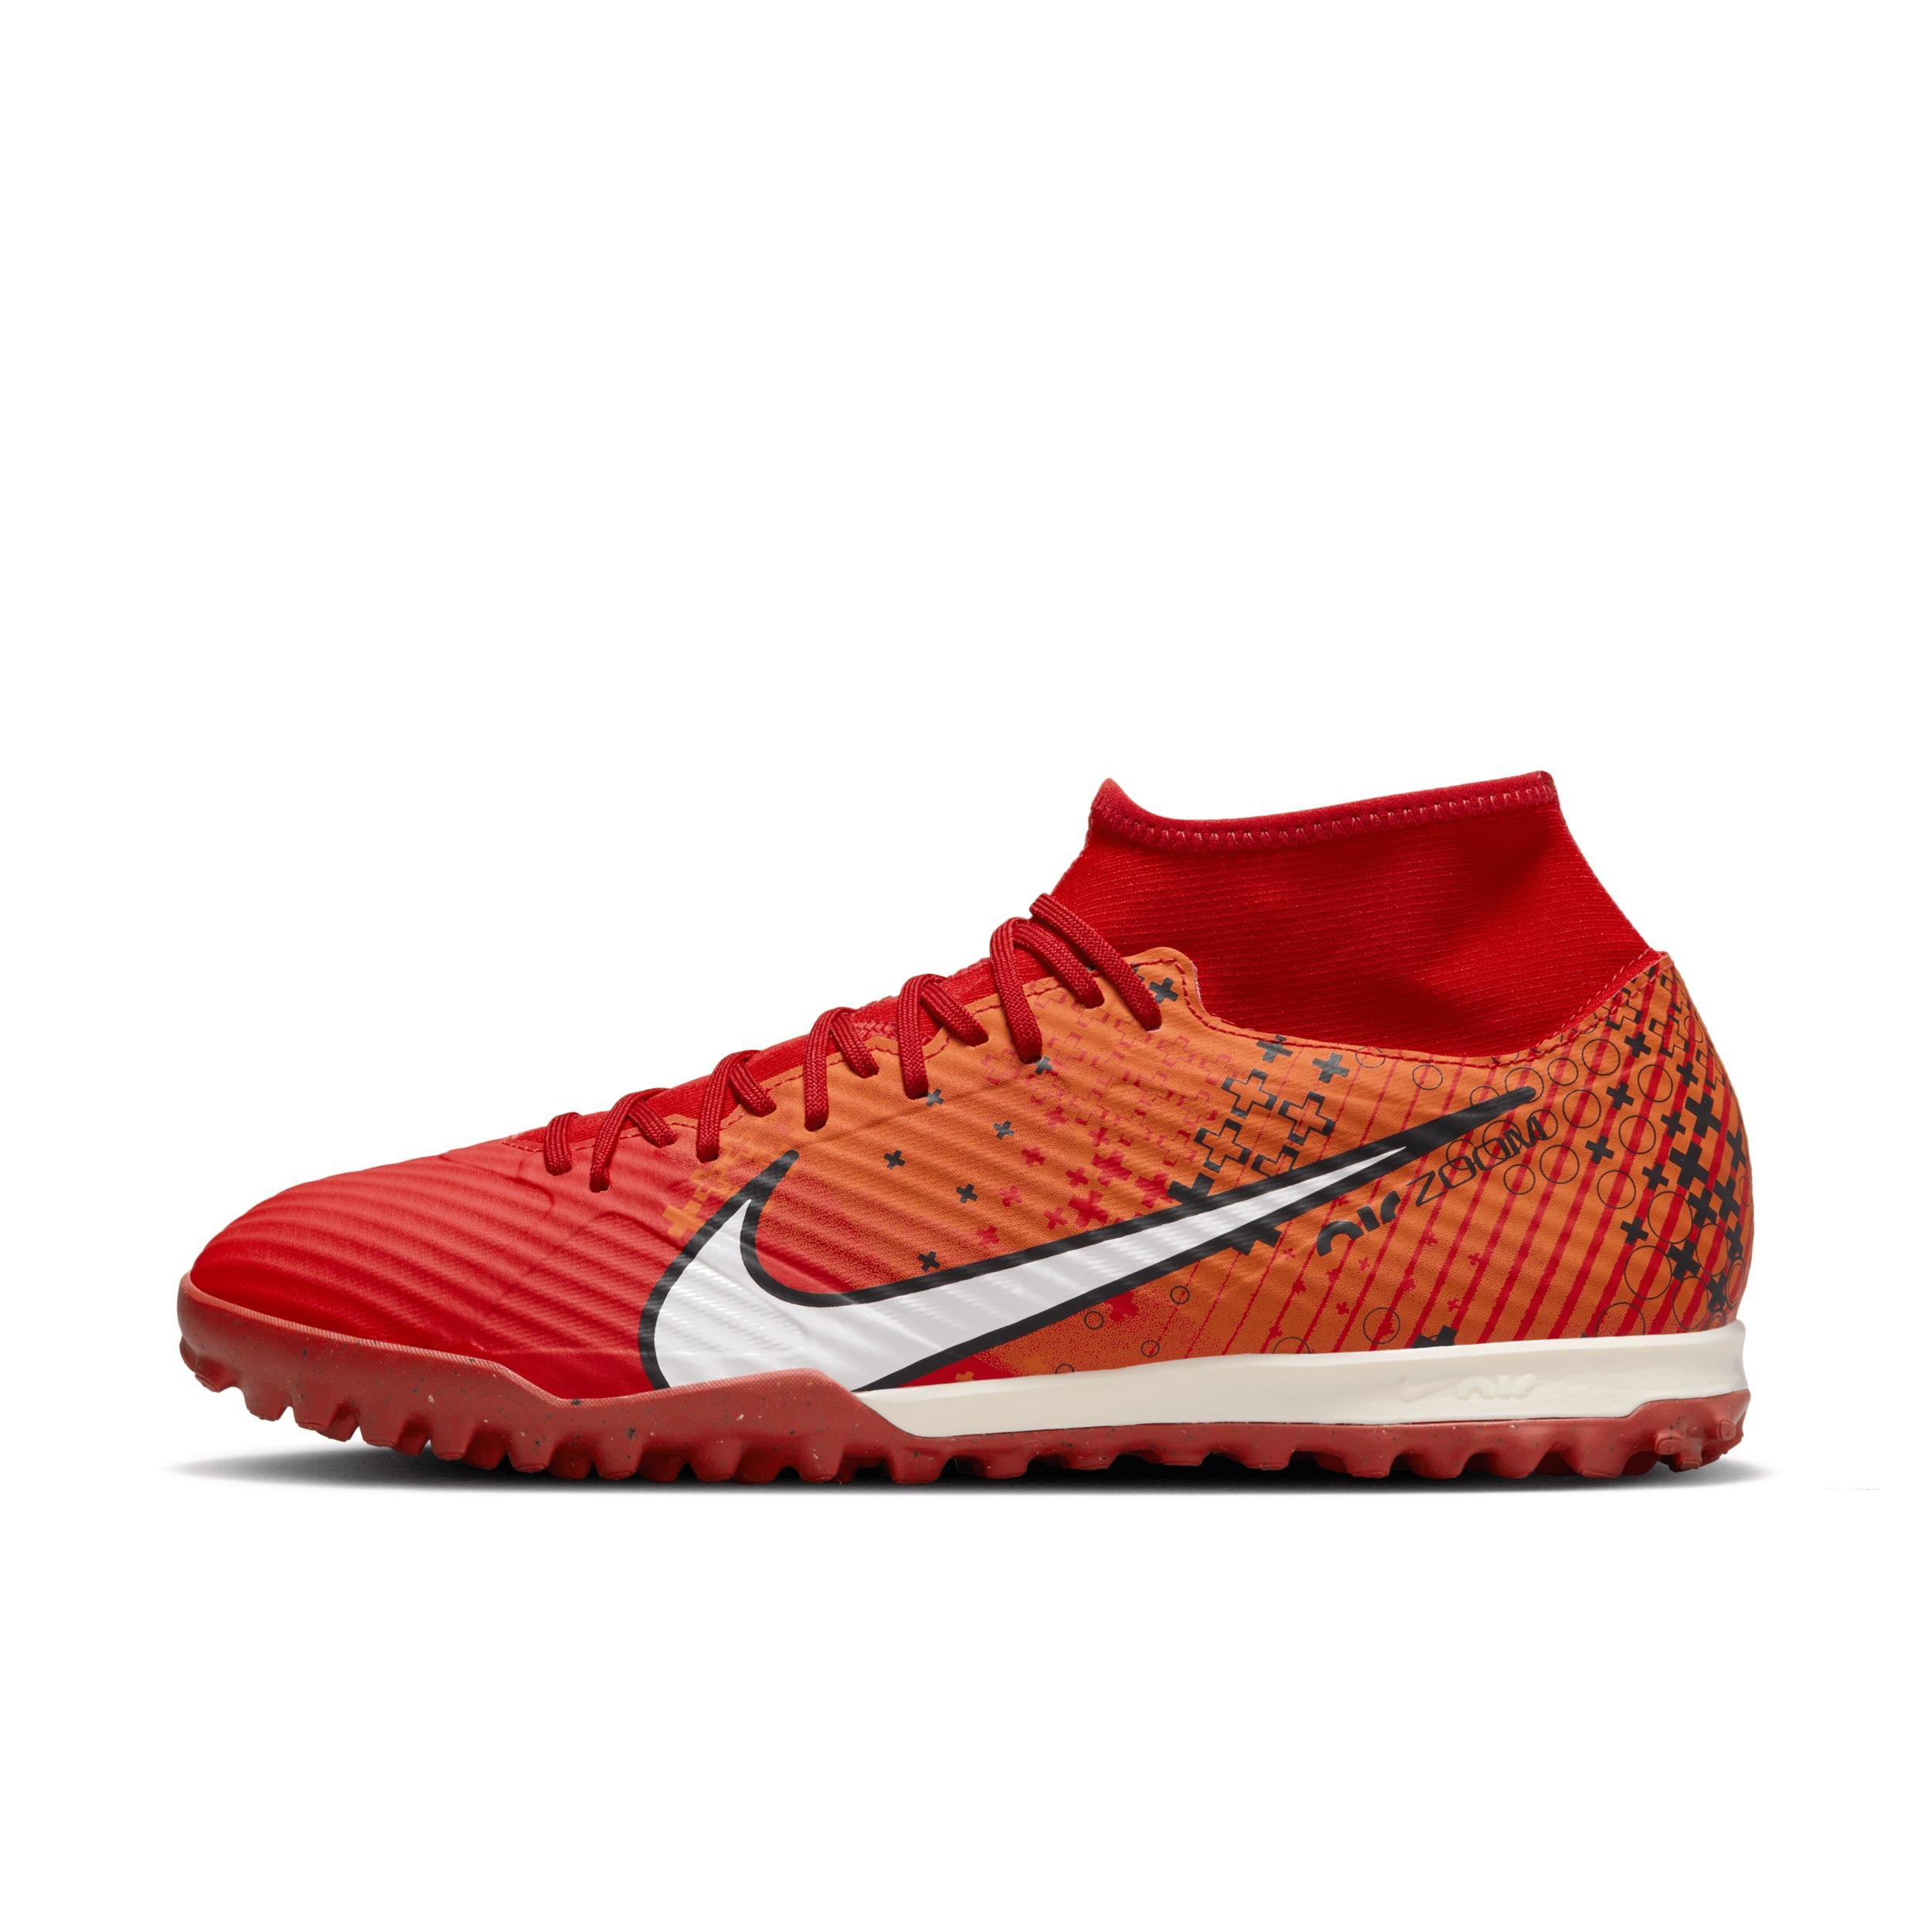 Nike Men's Superfly 9 Academy Mercurial Dream Speed TF High-Top Soccer Shoes by NIKE